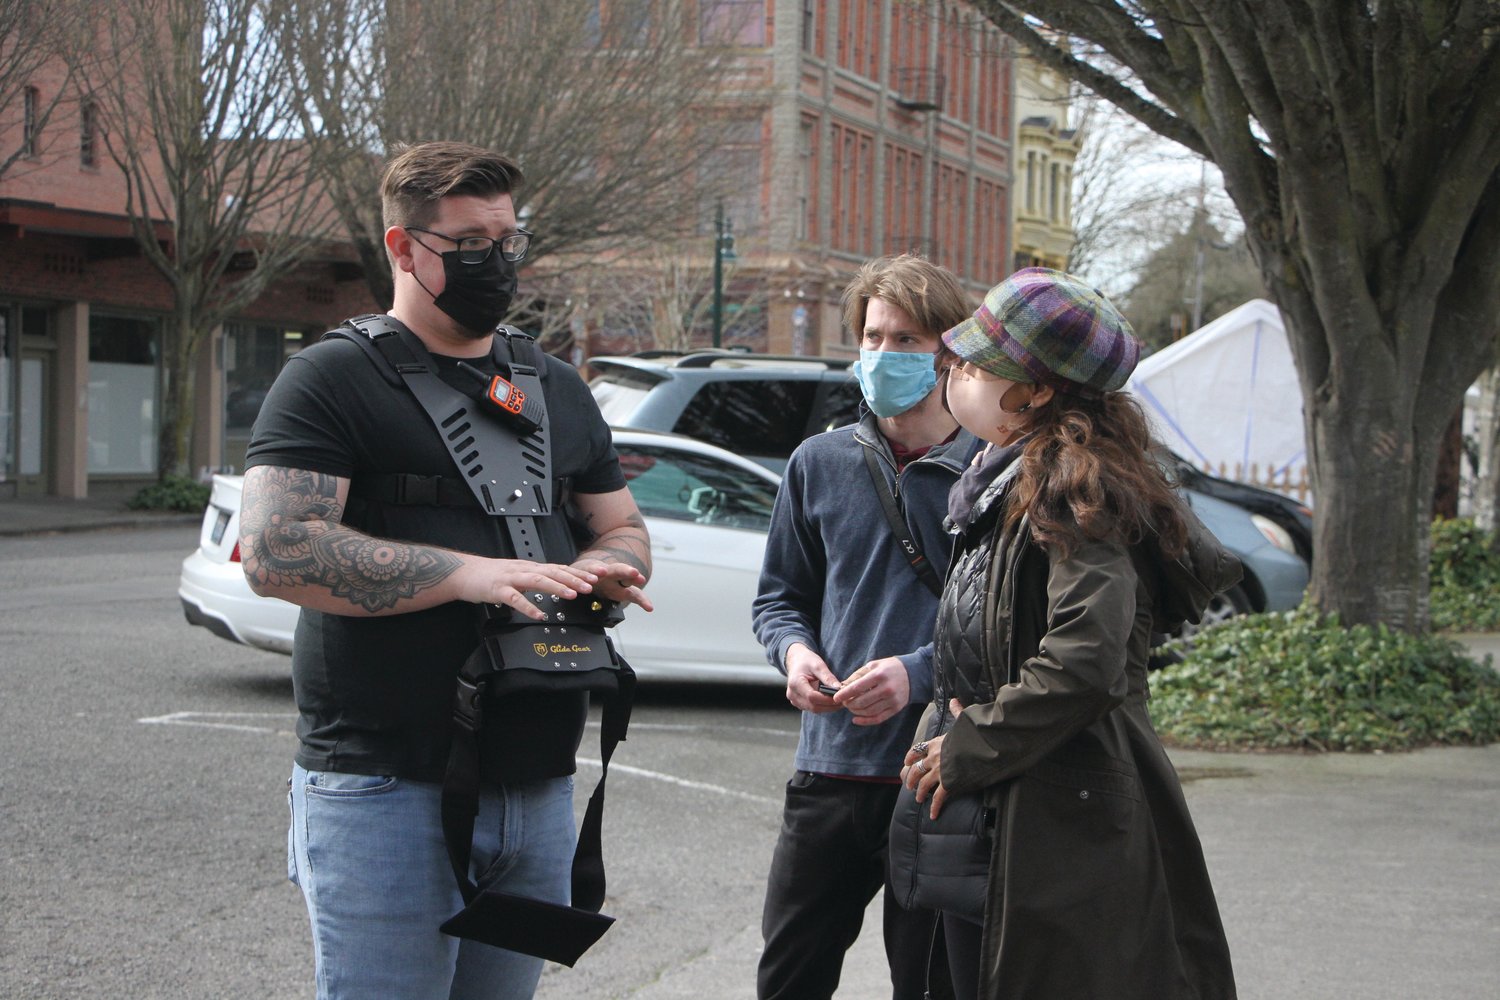 The cameraman and an assistant talk with Sundeen while the crew gets ready for filming on Washington Street.